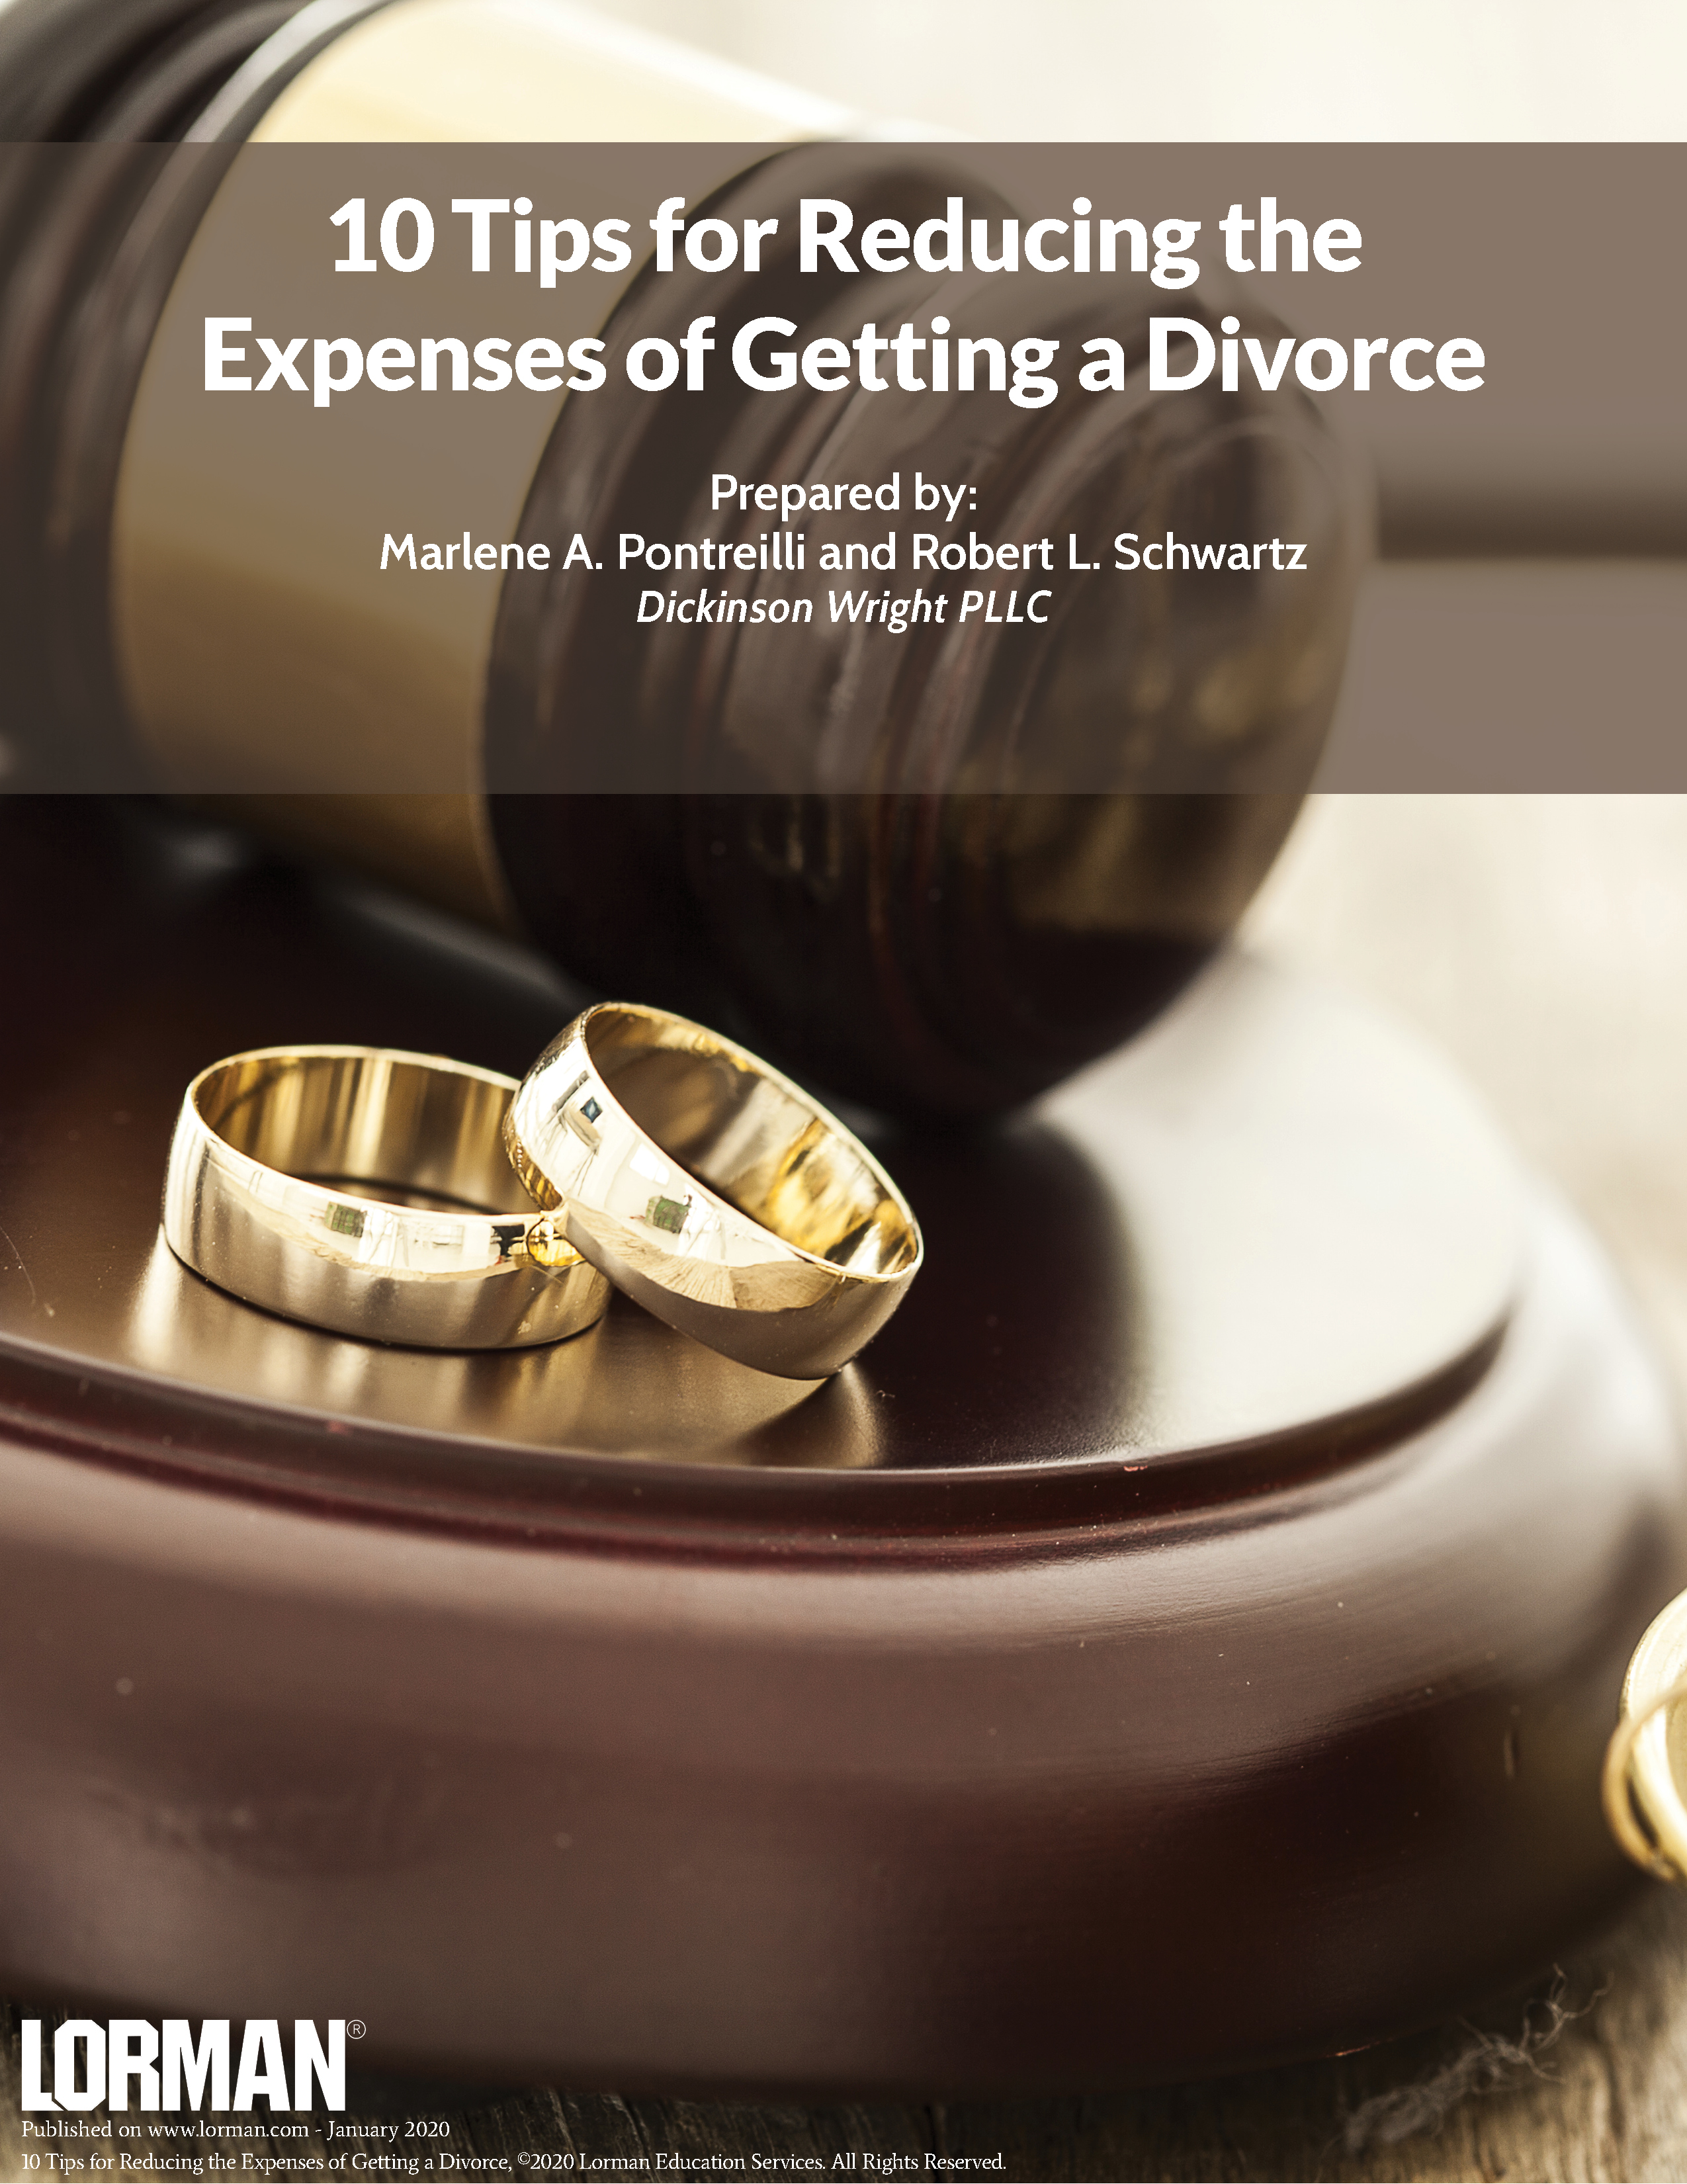 10 Tips for Reducing the Expenses of Getting a Divorce